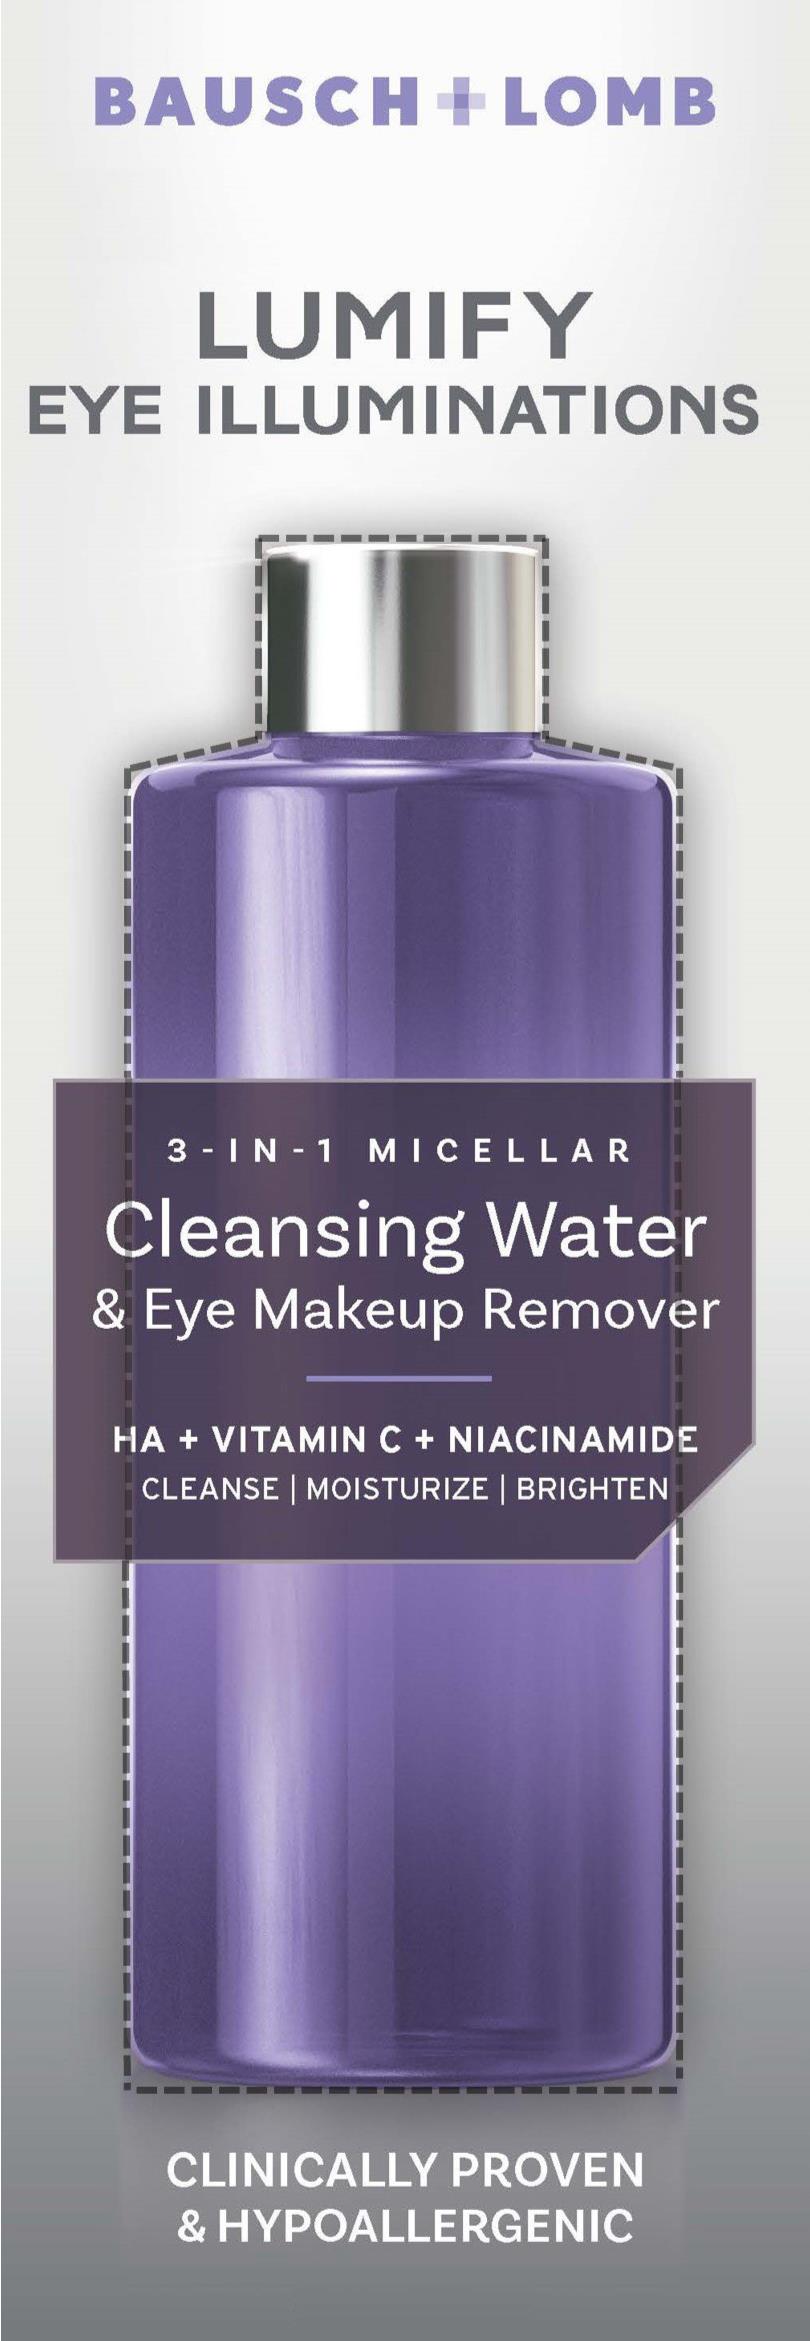  BAUSCH + LOMB LUMIFY EYE ILLUMINATIONS 3-IN-1 MICELLAR CLEANSING WATER &amp; EYE MAKEUP REMOVER HA + VITAMIN C + NIACINAMIDE CLEANSE MOISTURIZE BRIGHTEN CLINICALLY PROVEN &amp; HYPOALLERGENIC